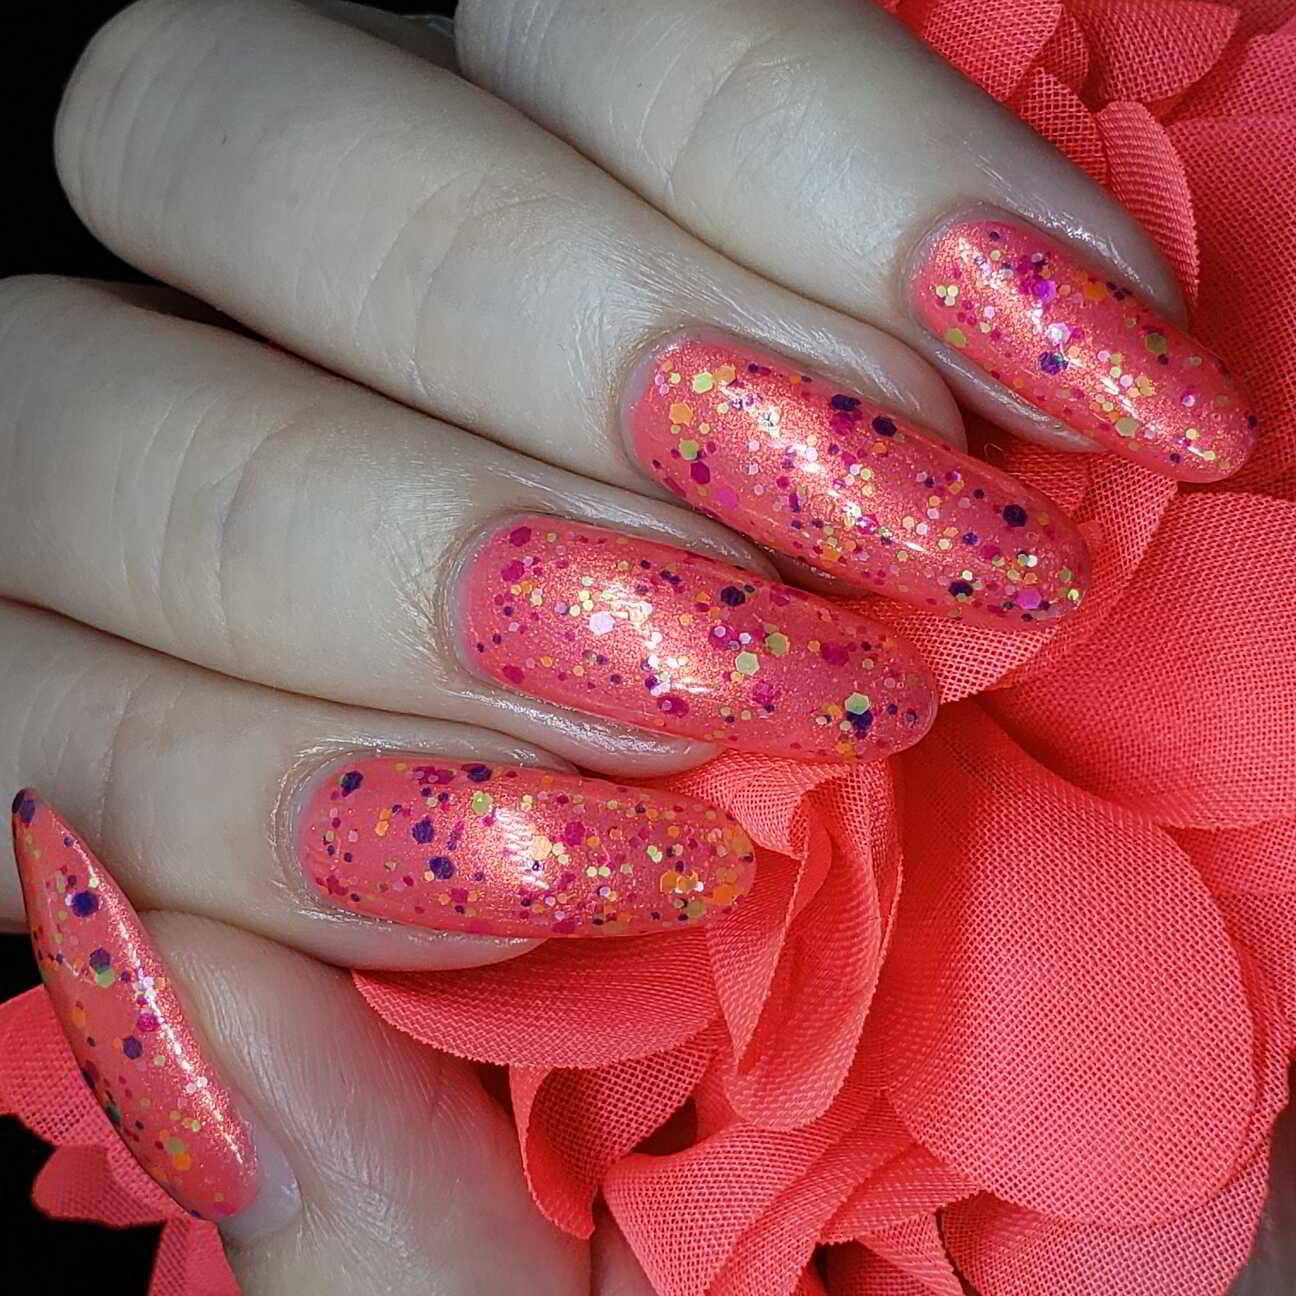 Nail polish manicure of shade China Glaze Point Me to the Party, Alchemy Lacquers Electric Sheep, Glisten and Glow Glitter Grabber, Orly Bonder, Seche Seche Vite, 